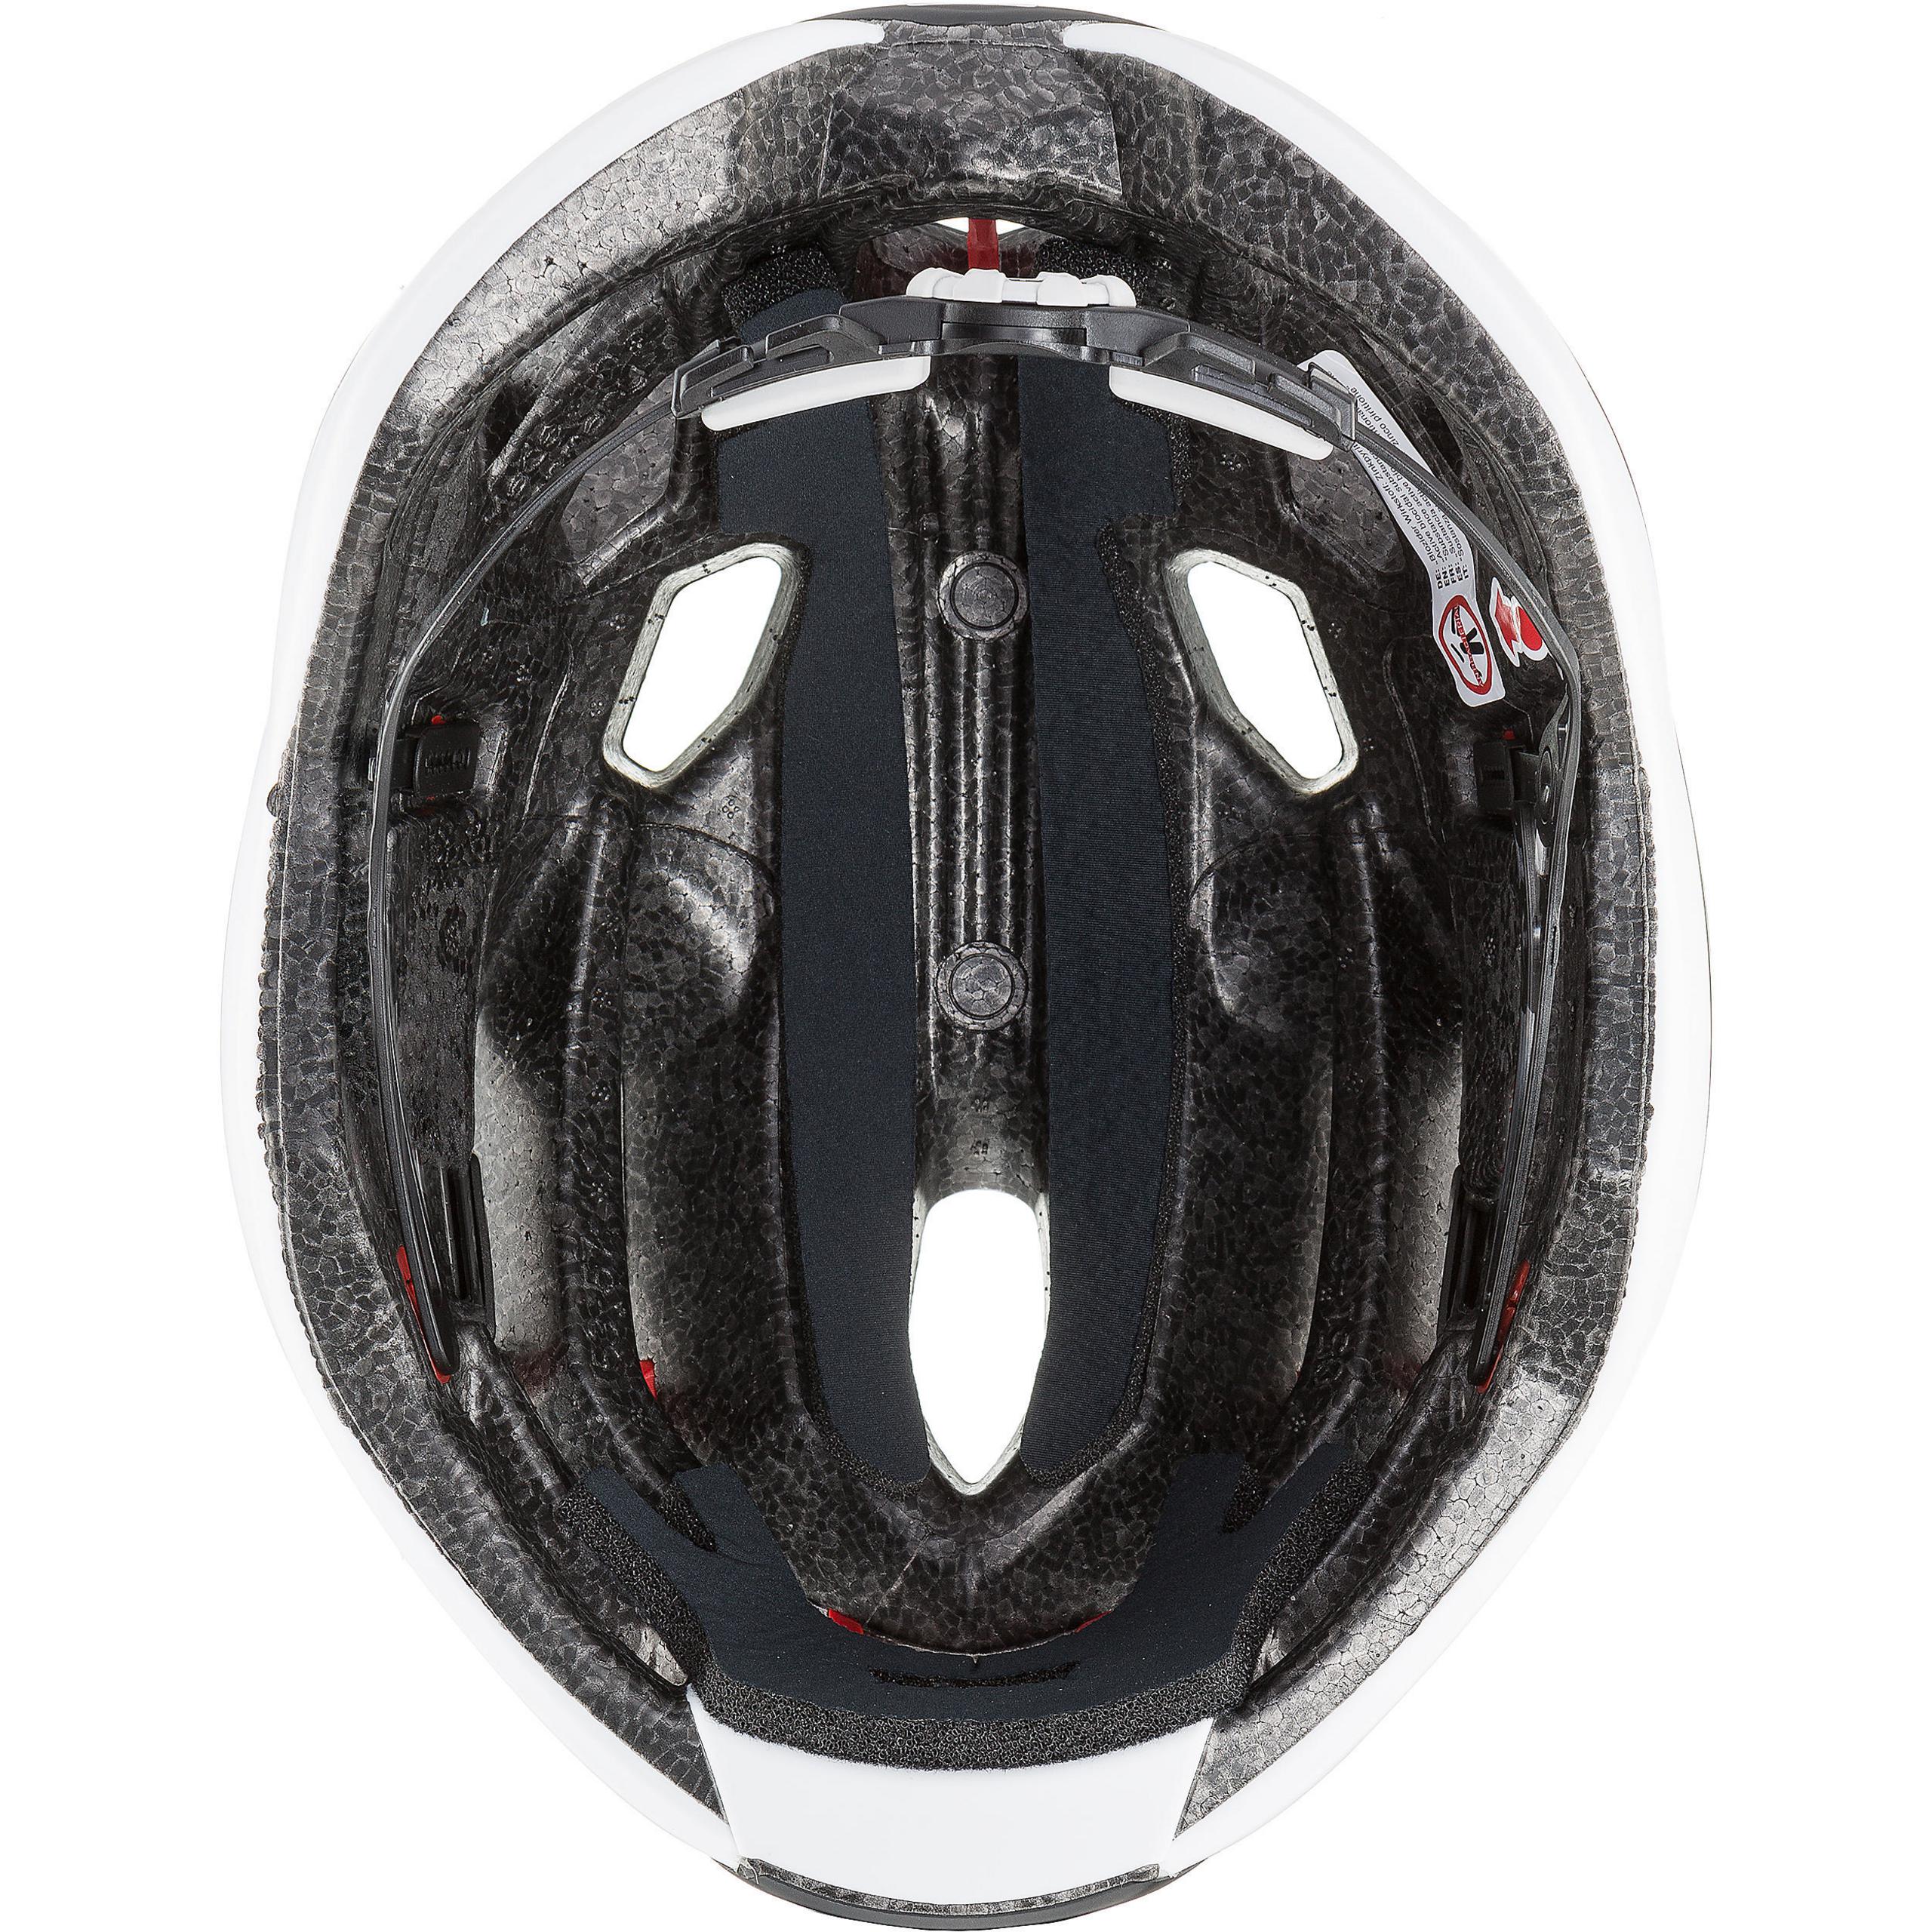 Uvex Race1 Cycling Bicycle Safety Protection Helmet Black Mat/Shinny 55-59cm 